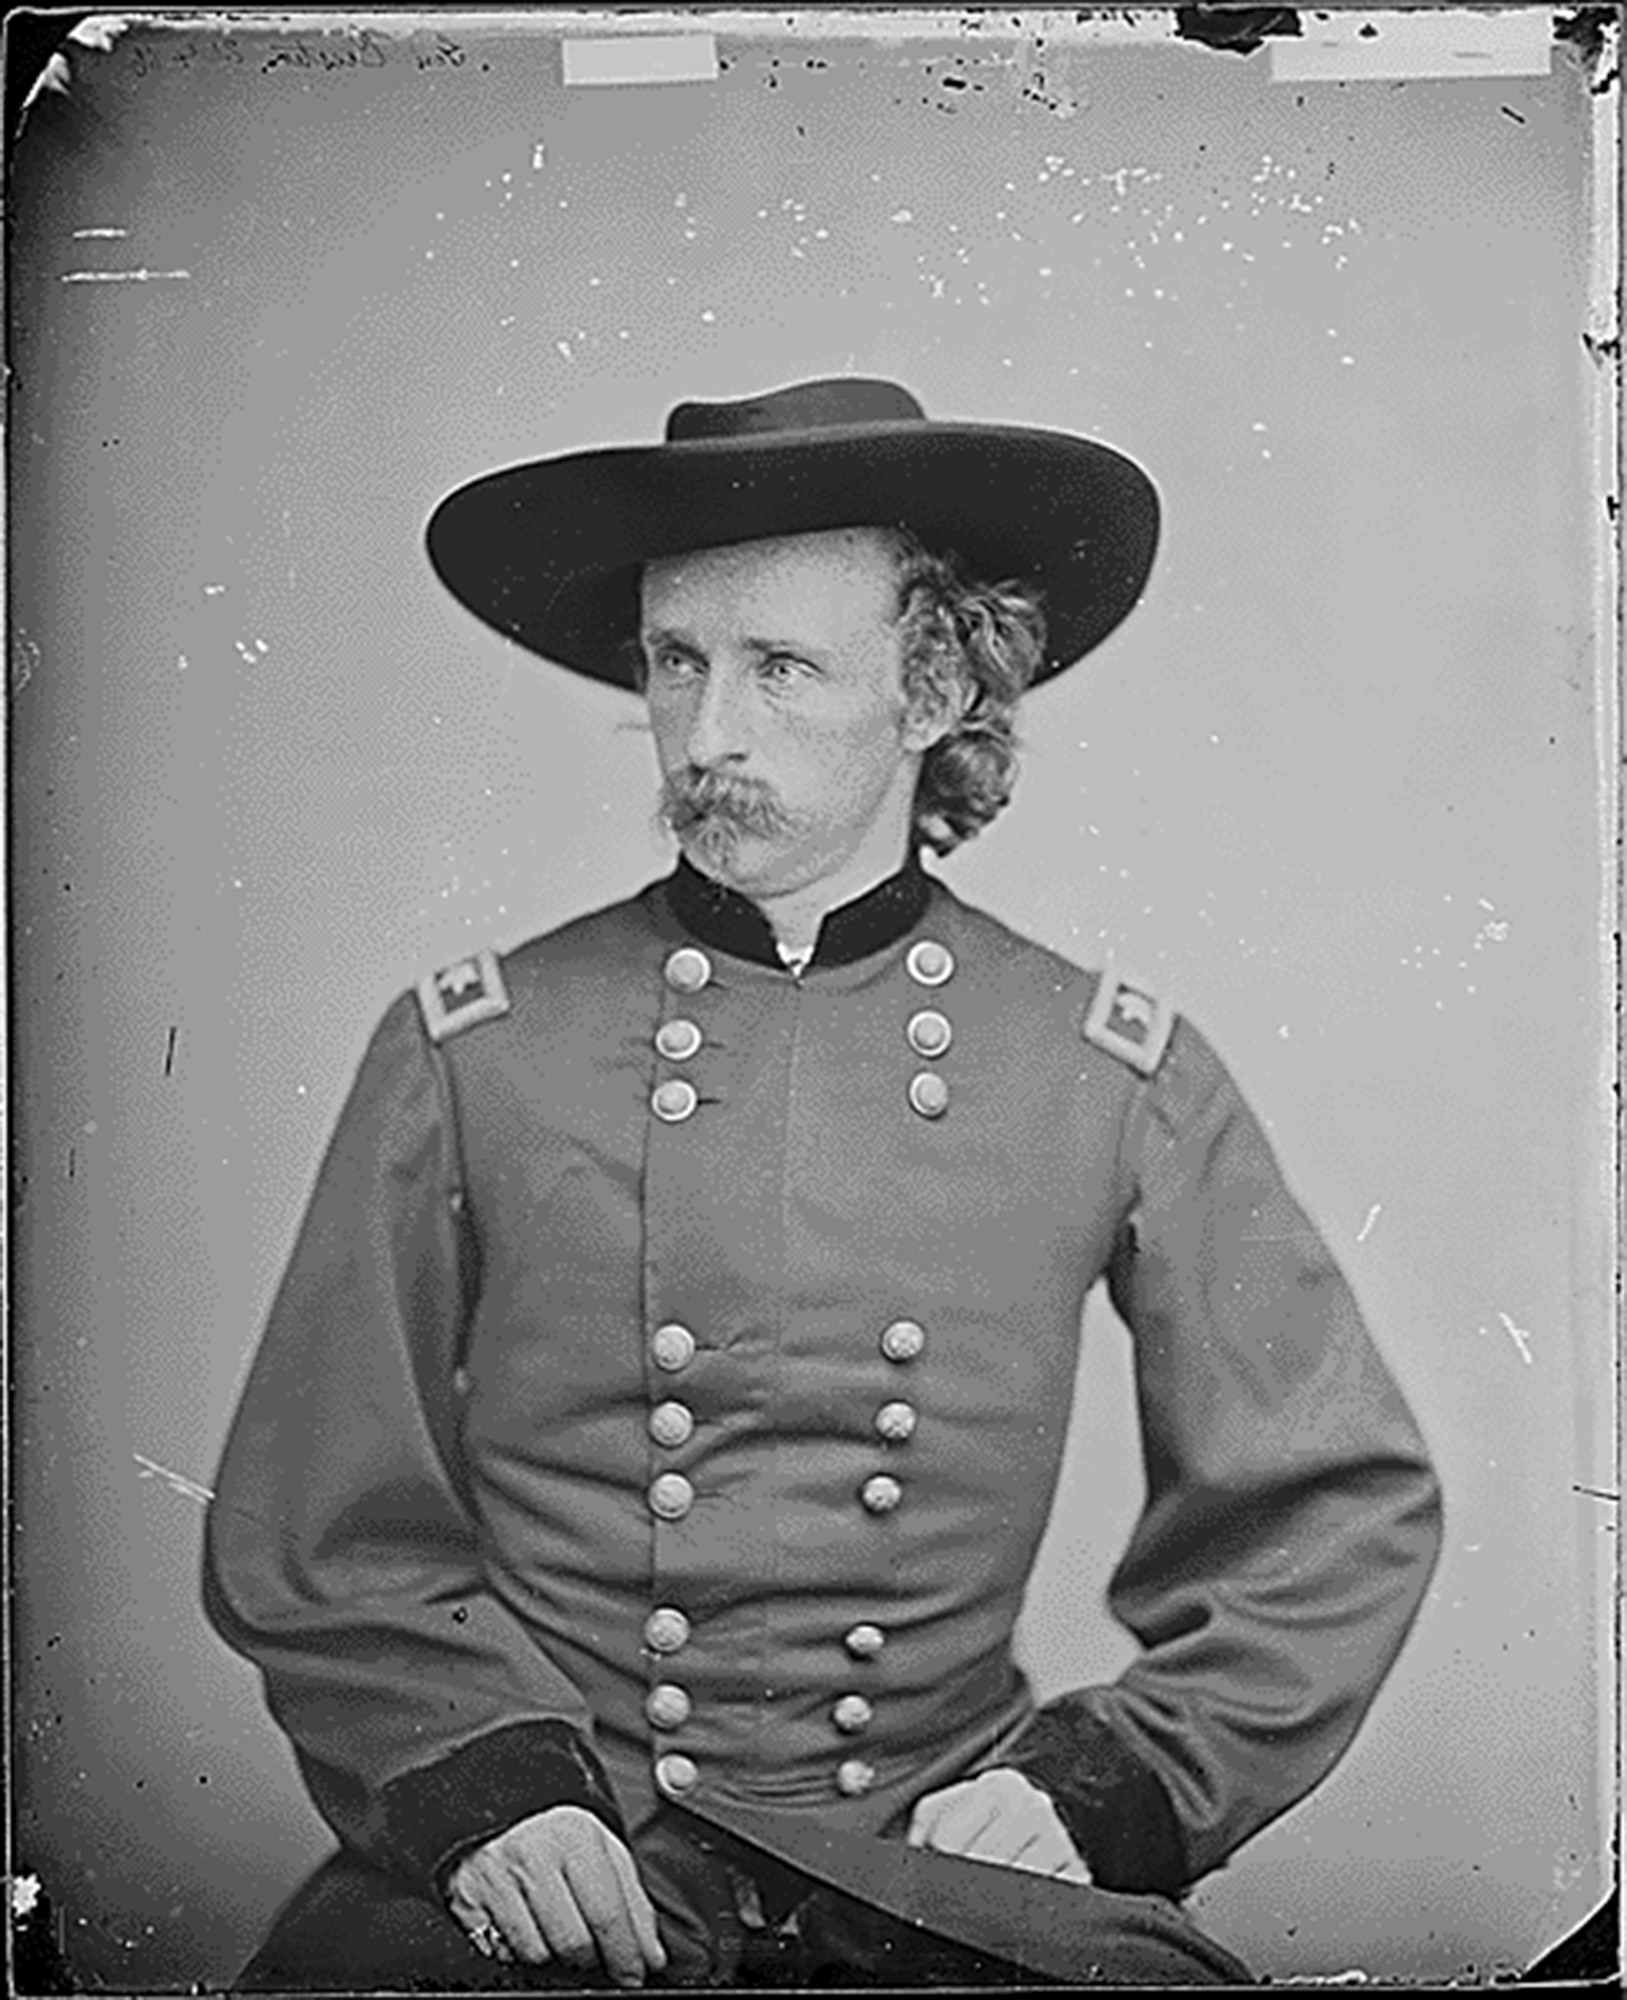 Gen. George A. Custer is a rather controversial figure, mostly remembered for his defeat and death at the Battle of Little Bighorn, but he was a successful leader for the Union Army during the Civil War. (Photo courtesy National Archives)